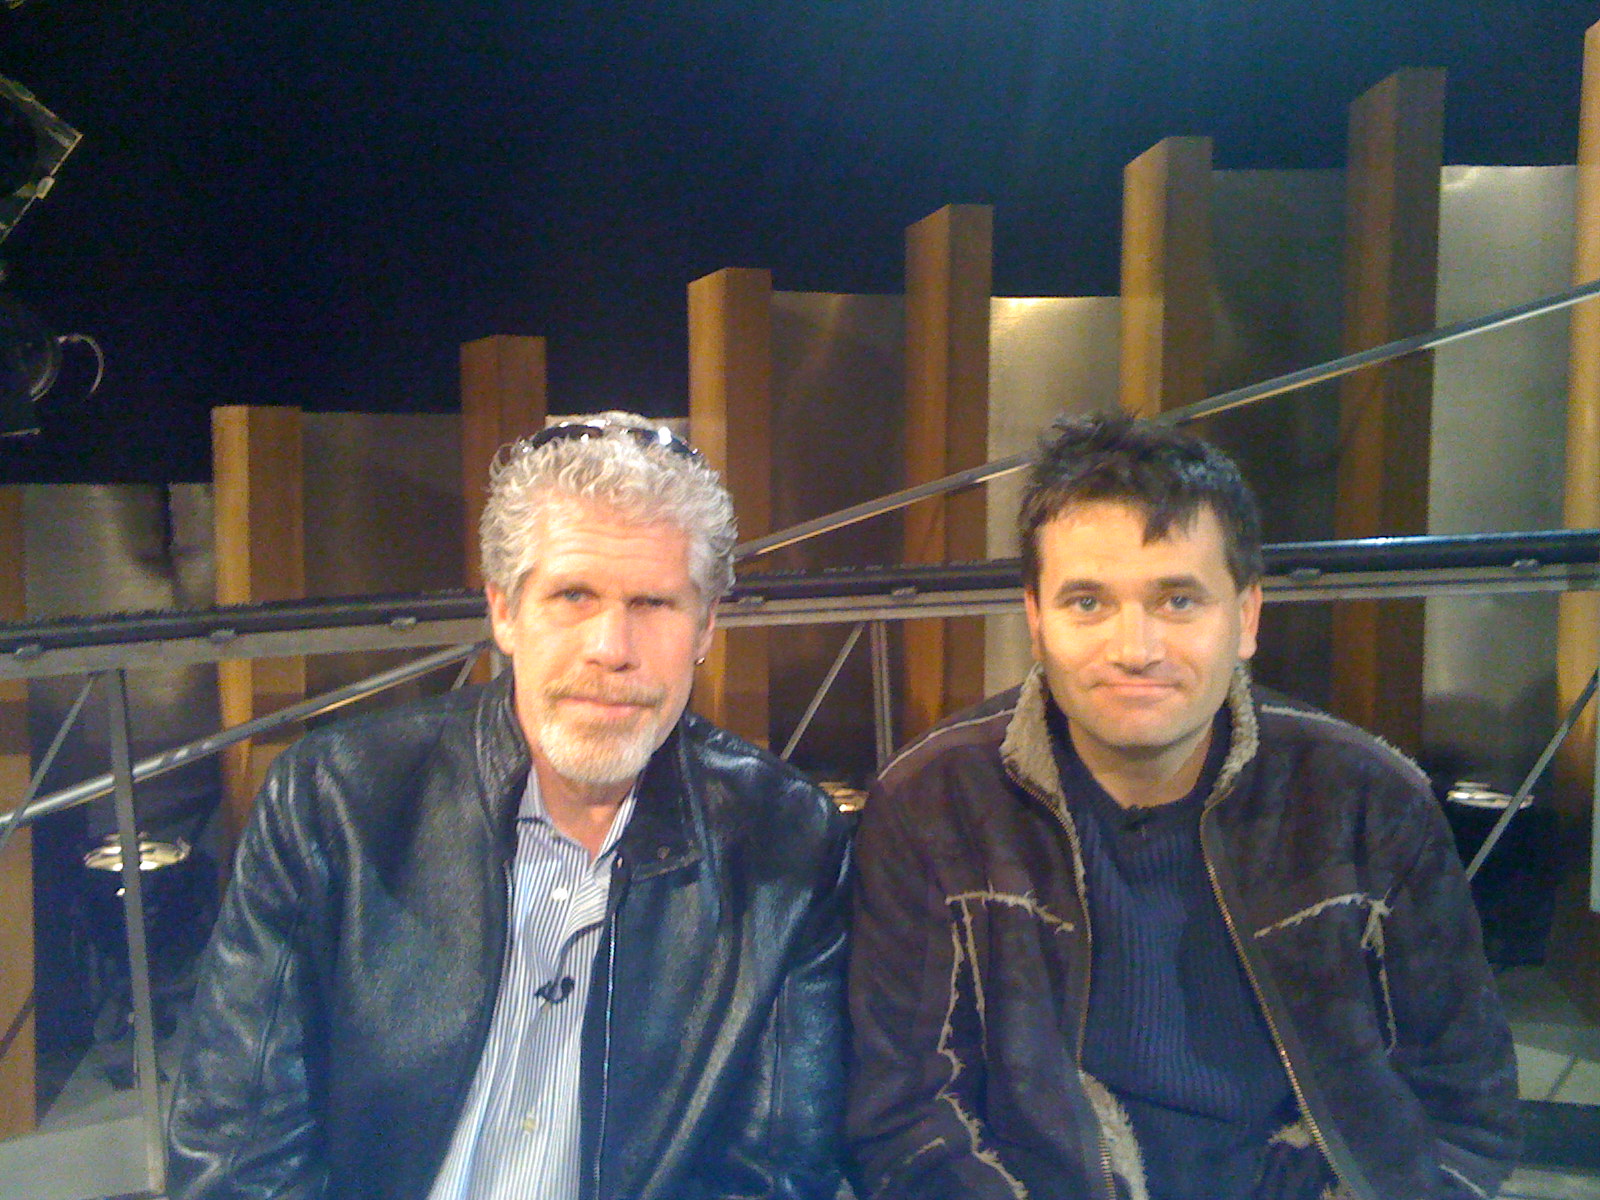 On a publicity tour with Ron Perlman.